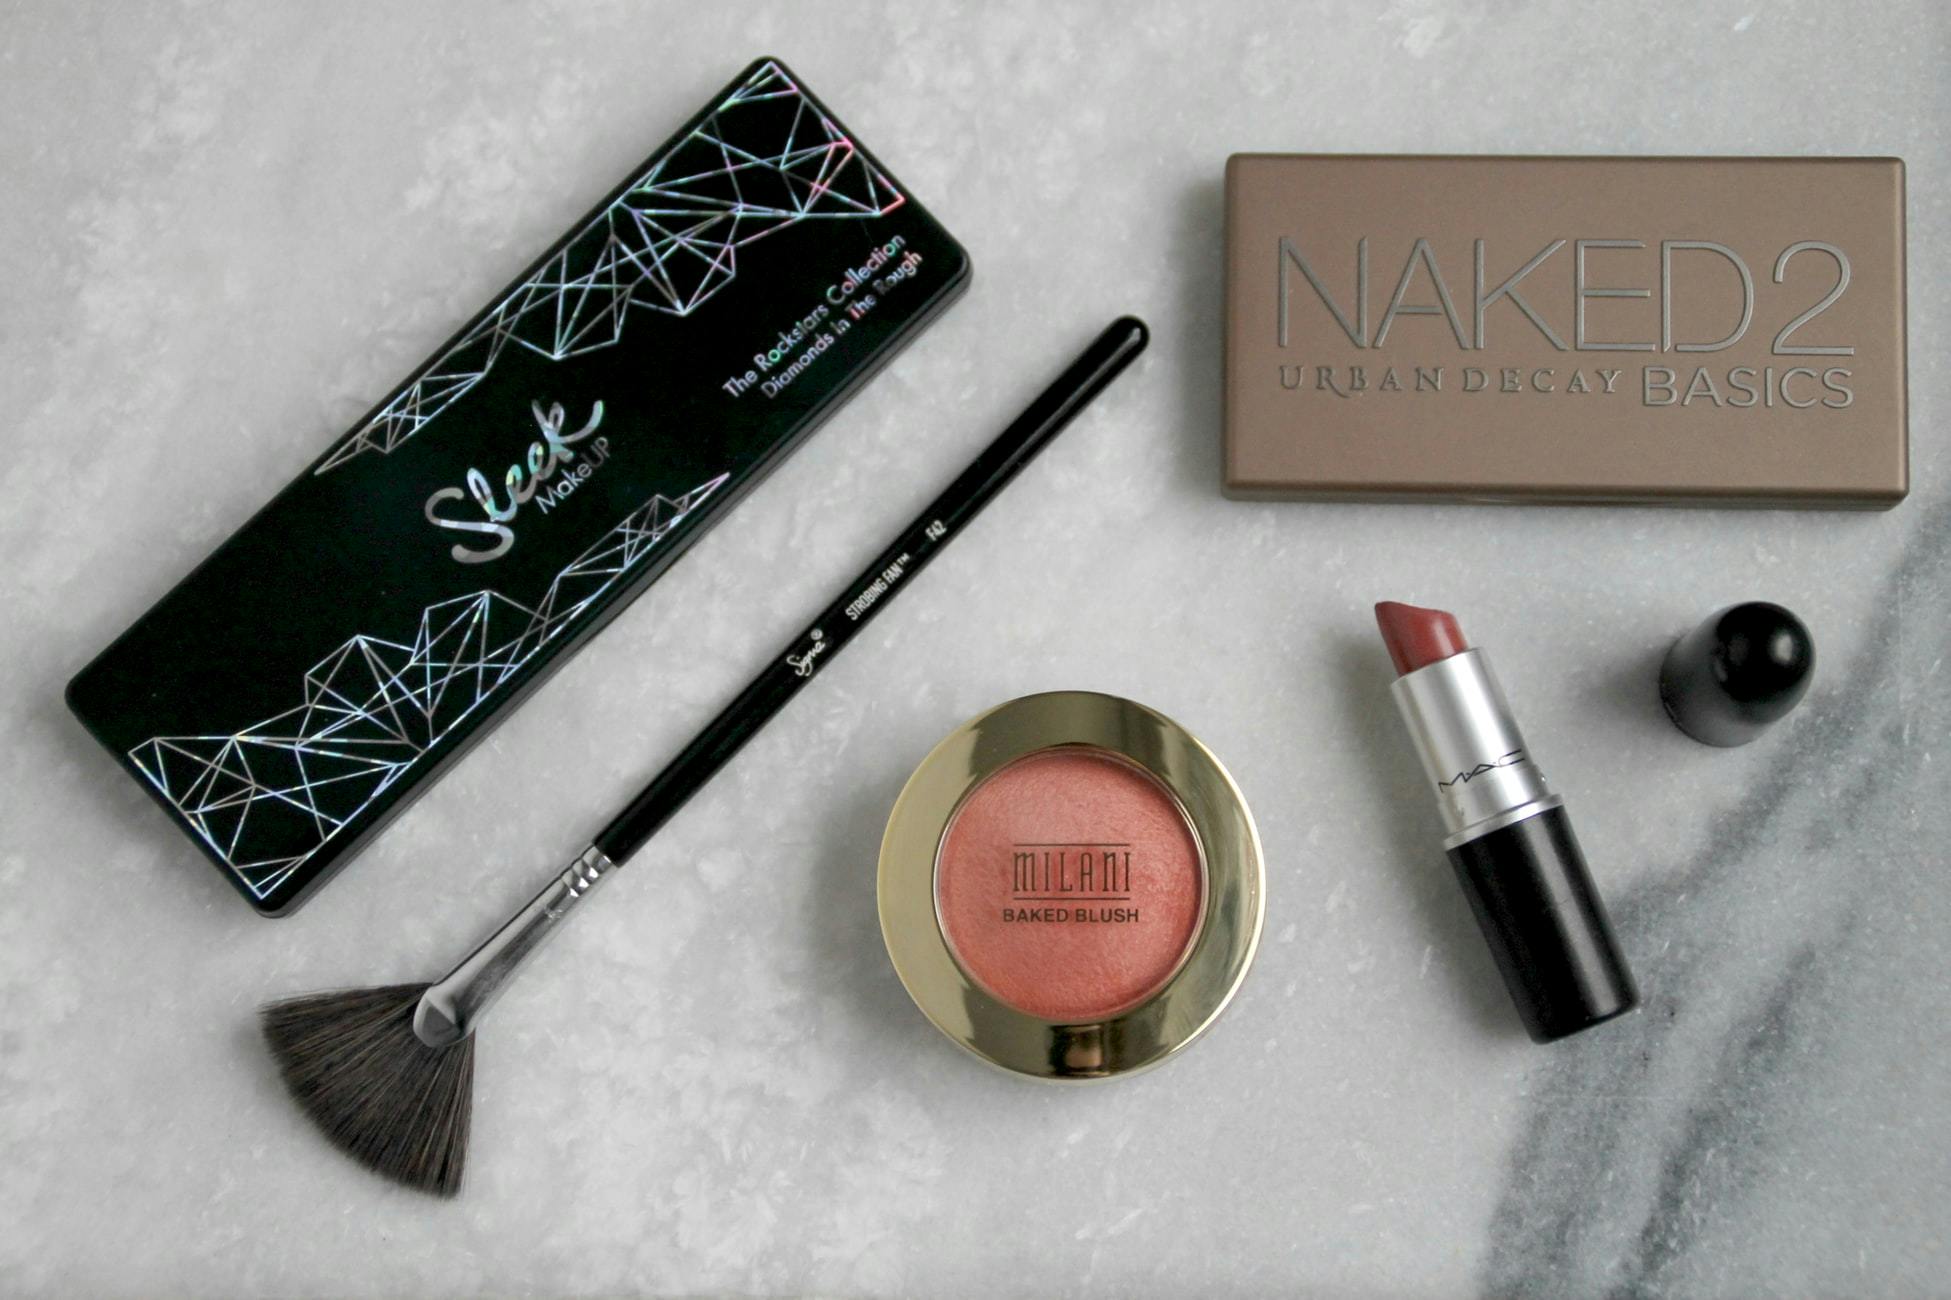 About Us: Cruelty-free, Vegan Makeup Products - Urban Decay